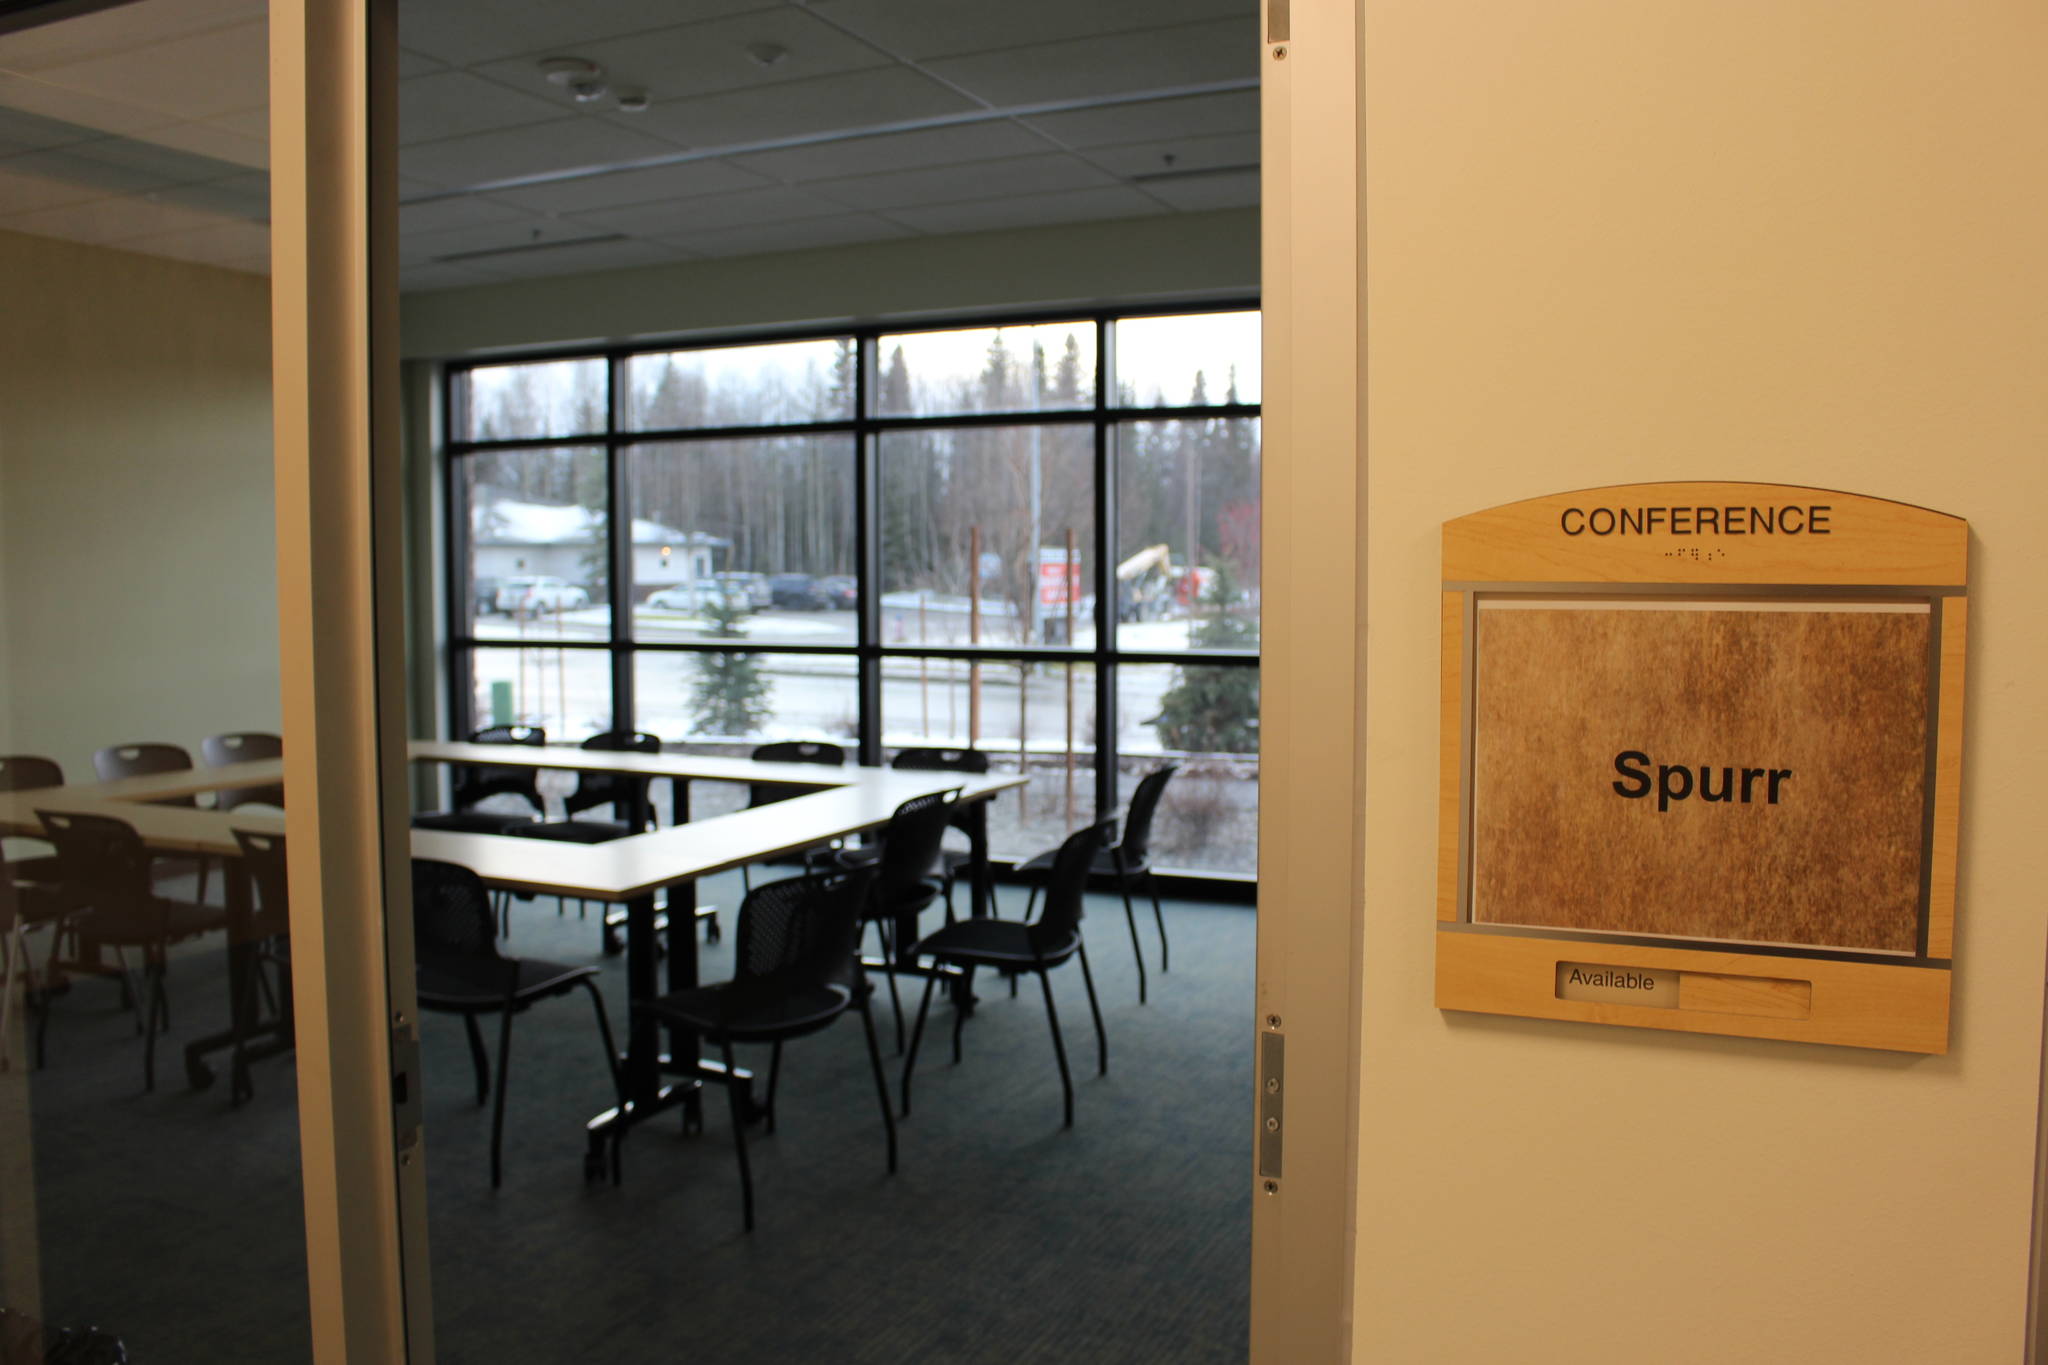 The Spurr Conference Room, which is part of the newest wing of Central Peninsula Hospital, can be seen here in Soldotna, Alaska on Nov. 20, 2019. (Photo by Brian Mazurek/Peninsula Clarion)